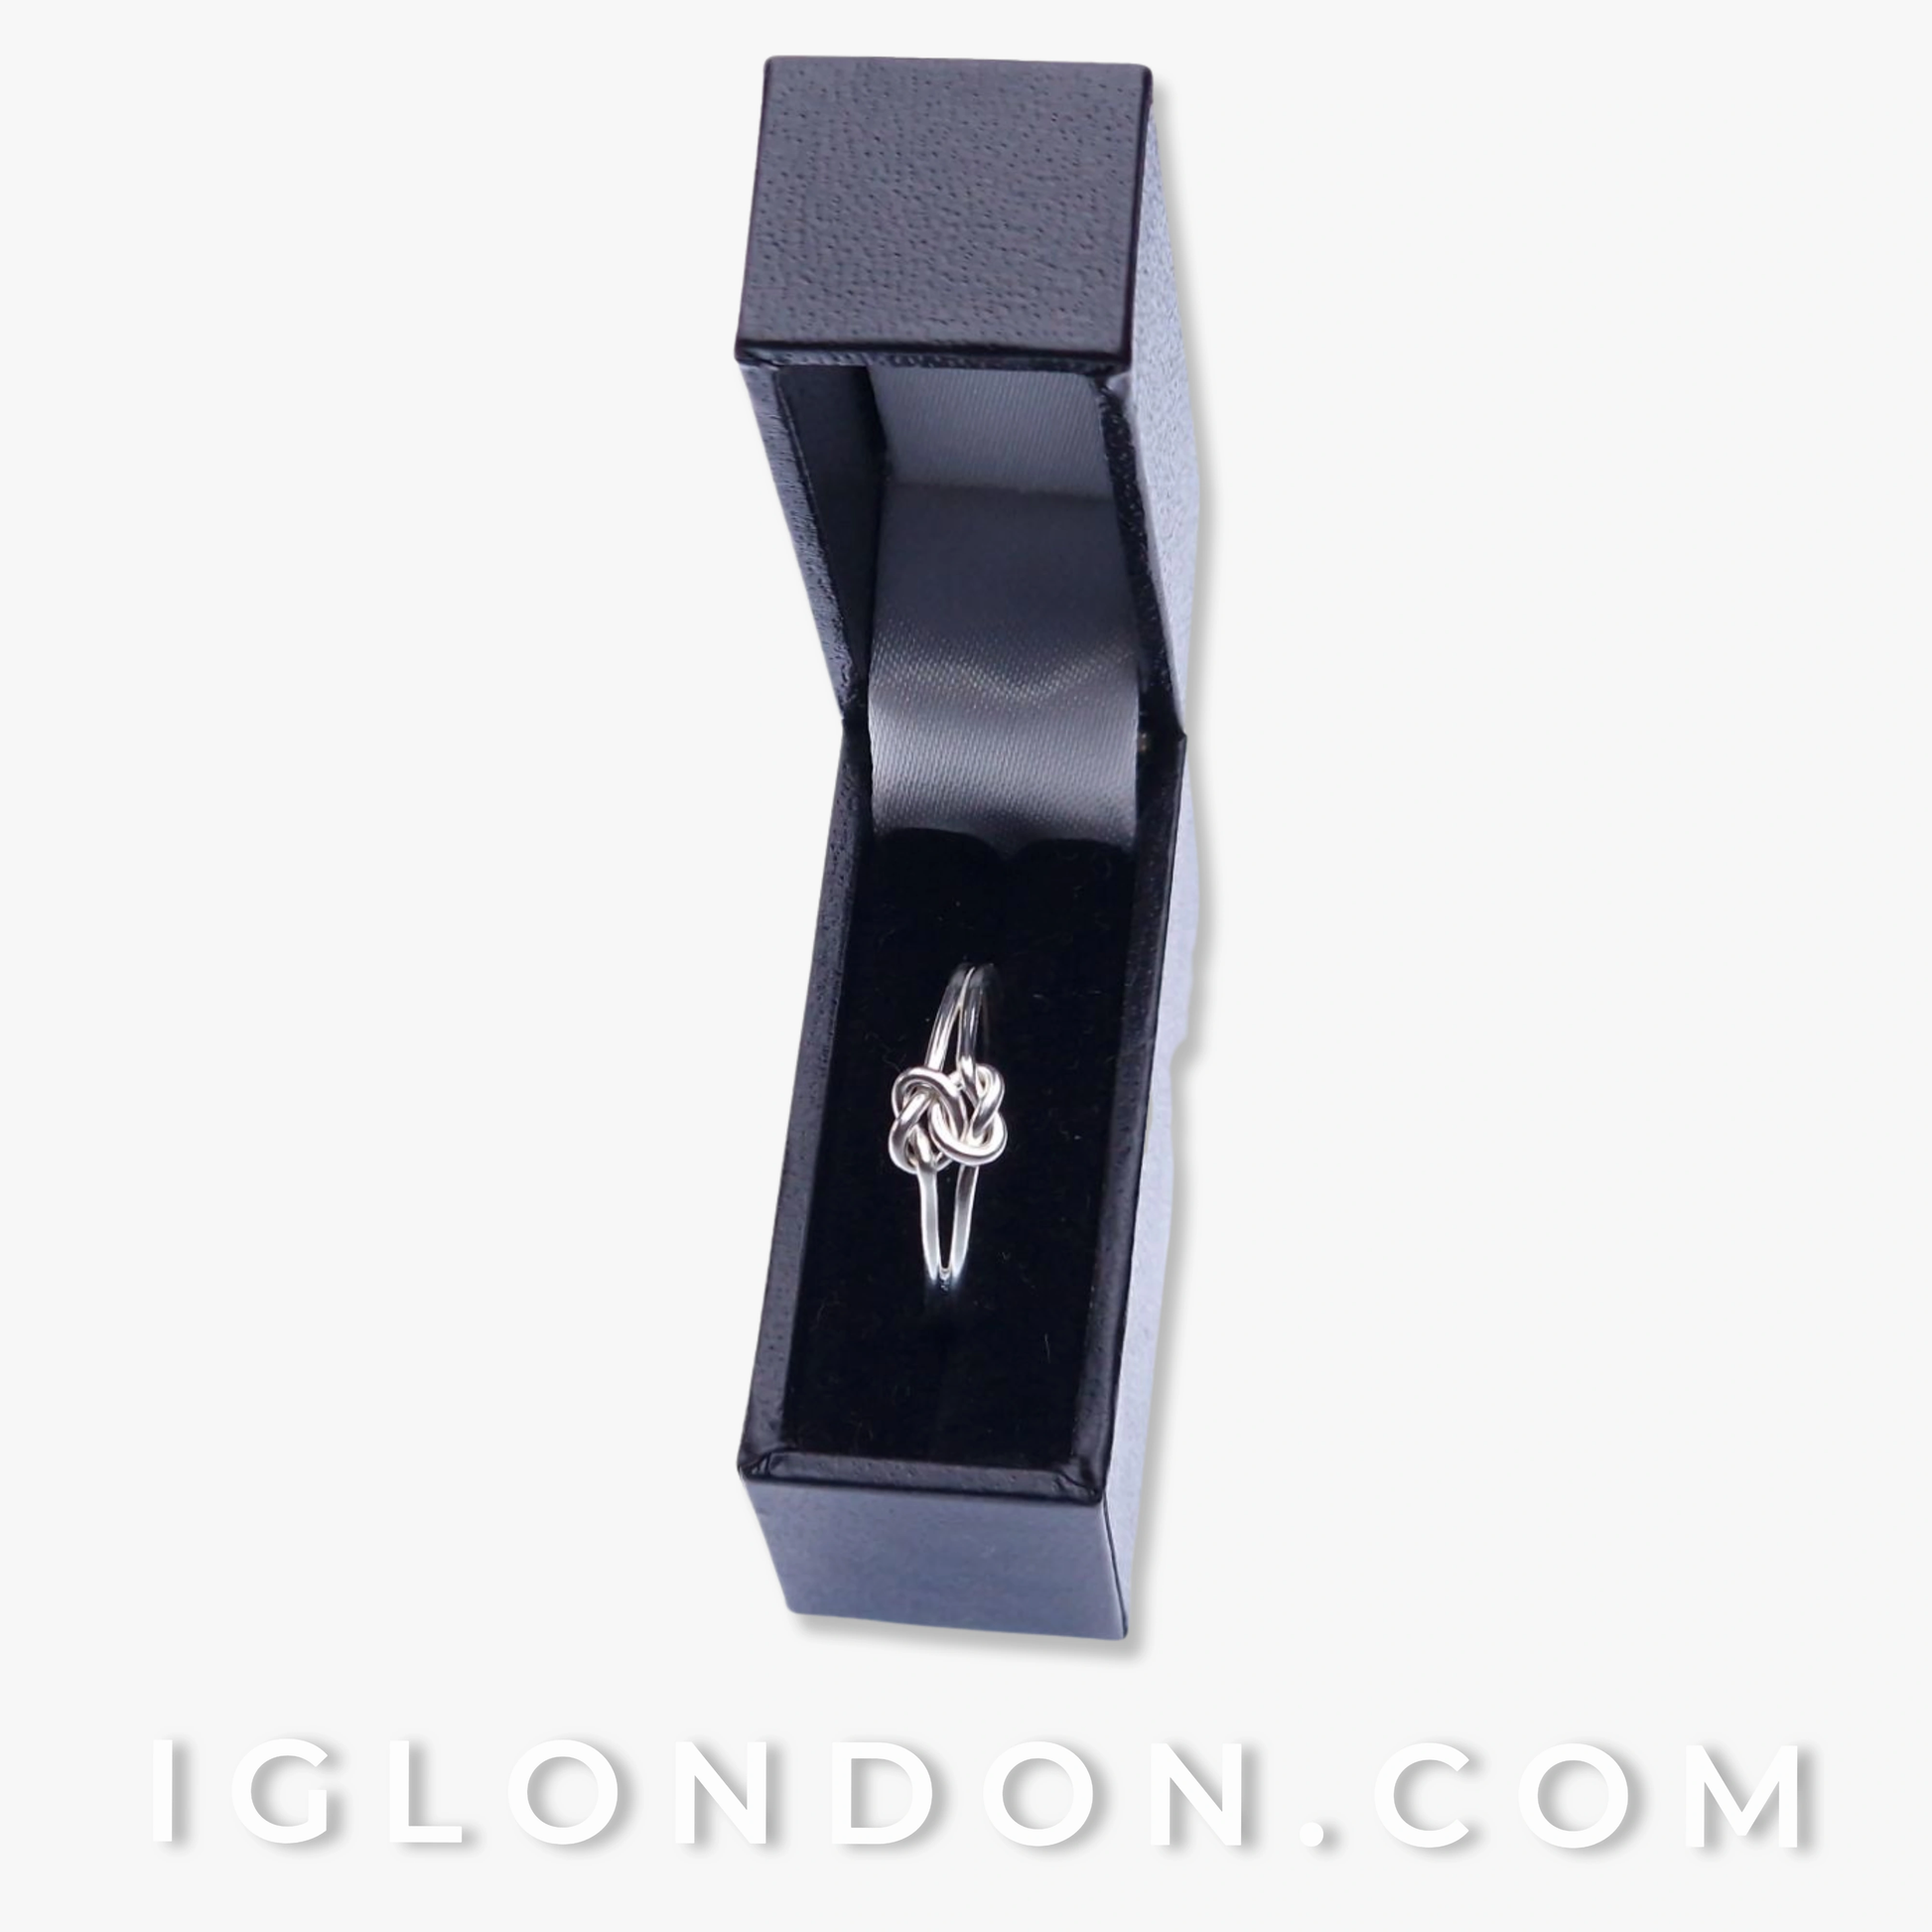 Double knot ring Double knot ring crafted in sterling silver - IGLondon.com IGLondonByElissa, new